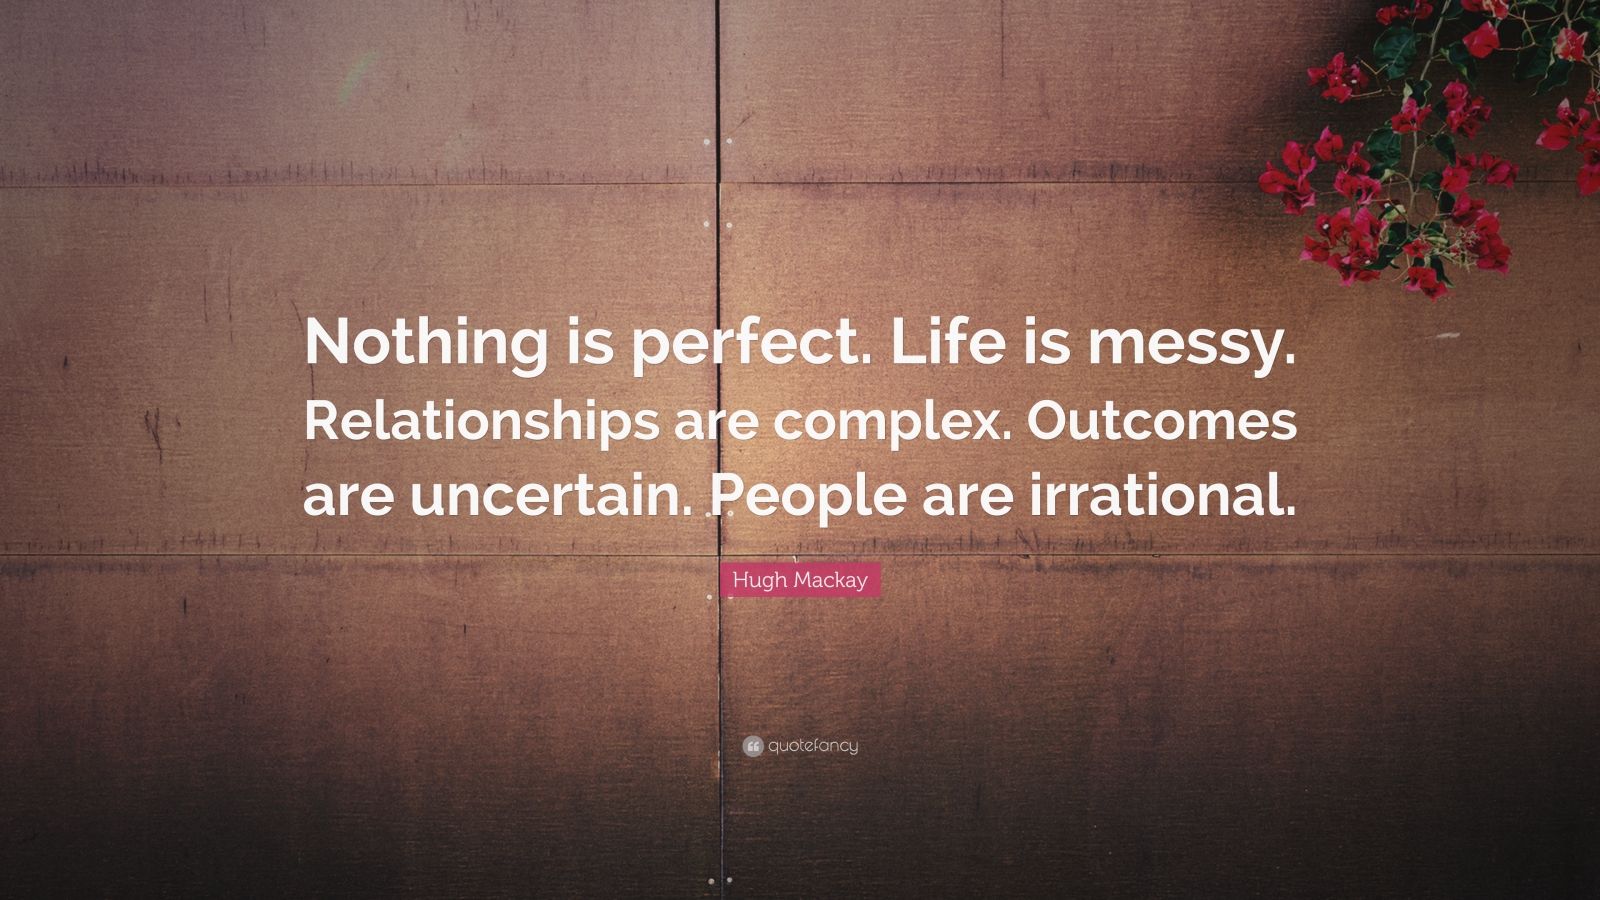 Hugh Mackay Quote: “Nothing is perfect. Life is messy. Relationships ...